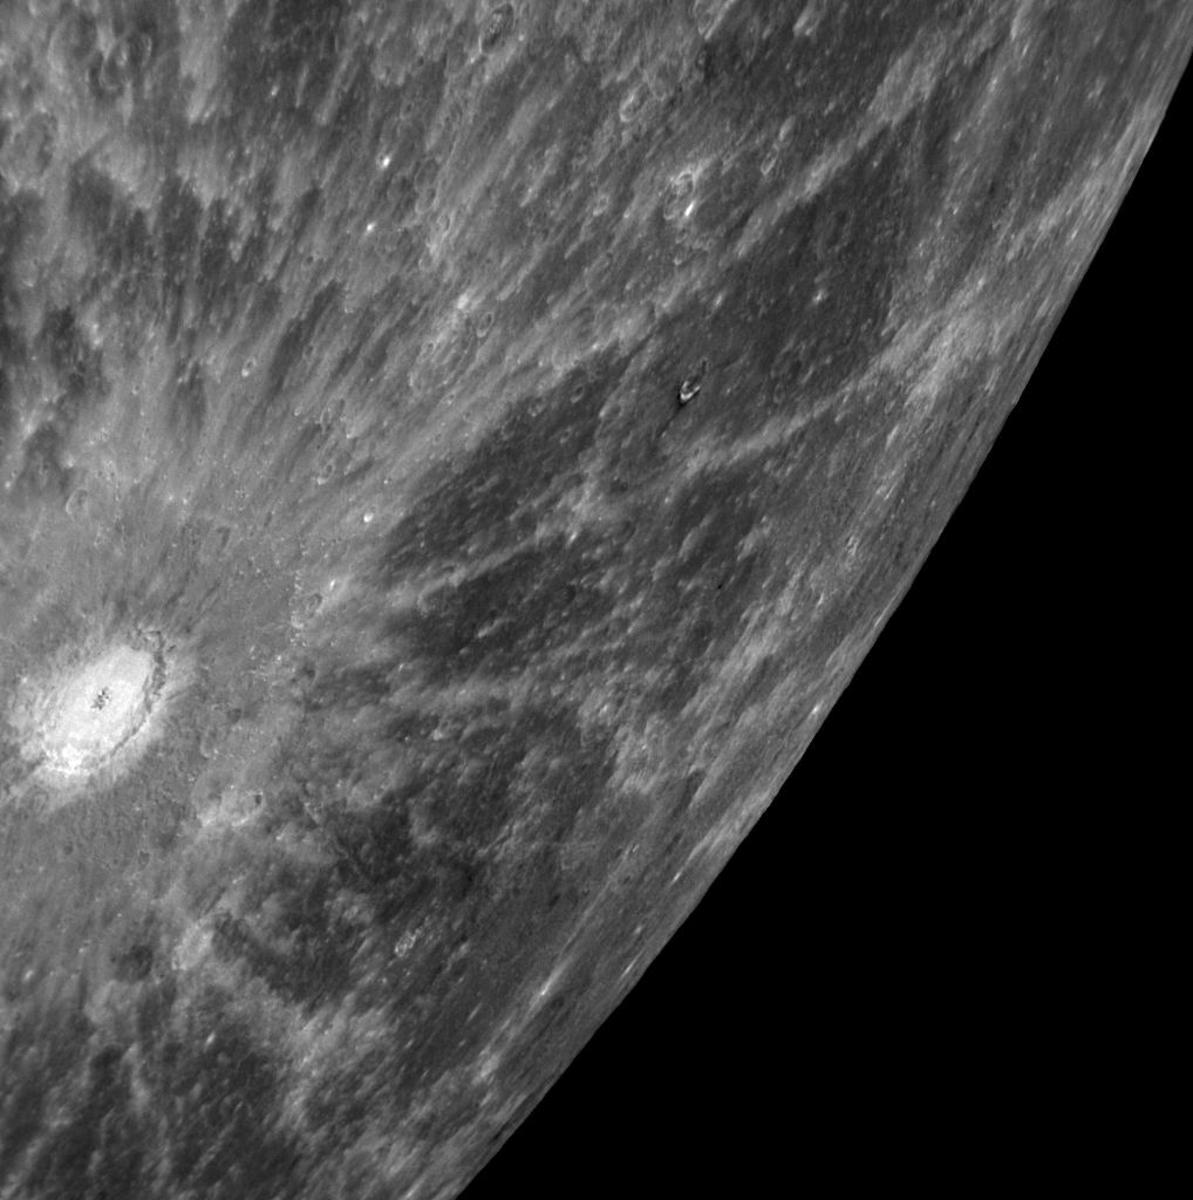 A large crater on Mercury